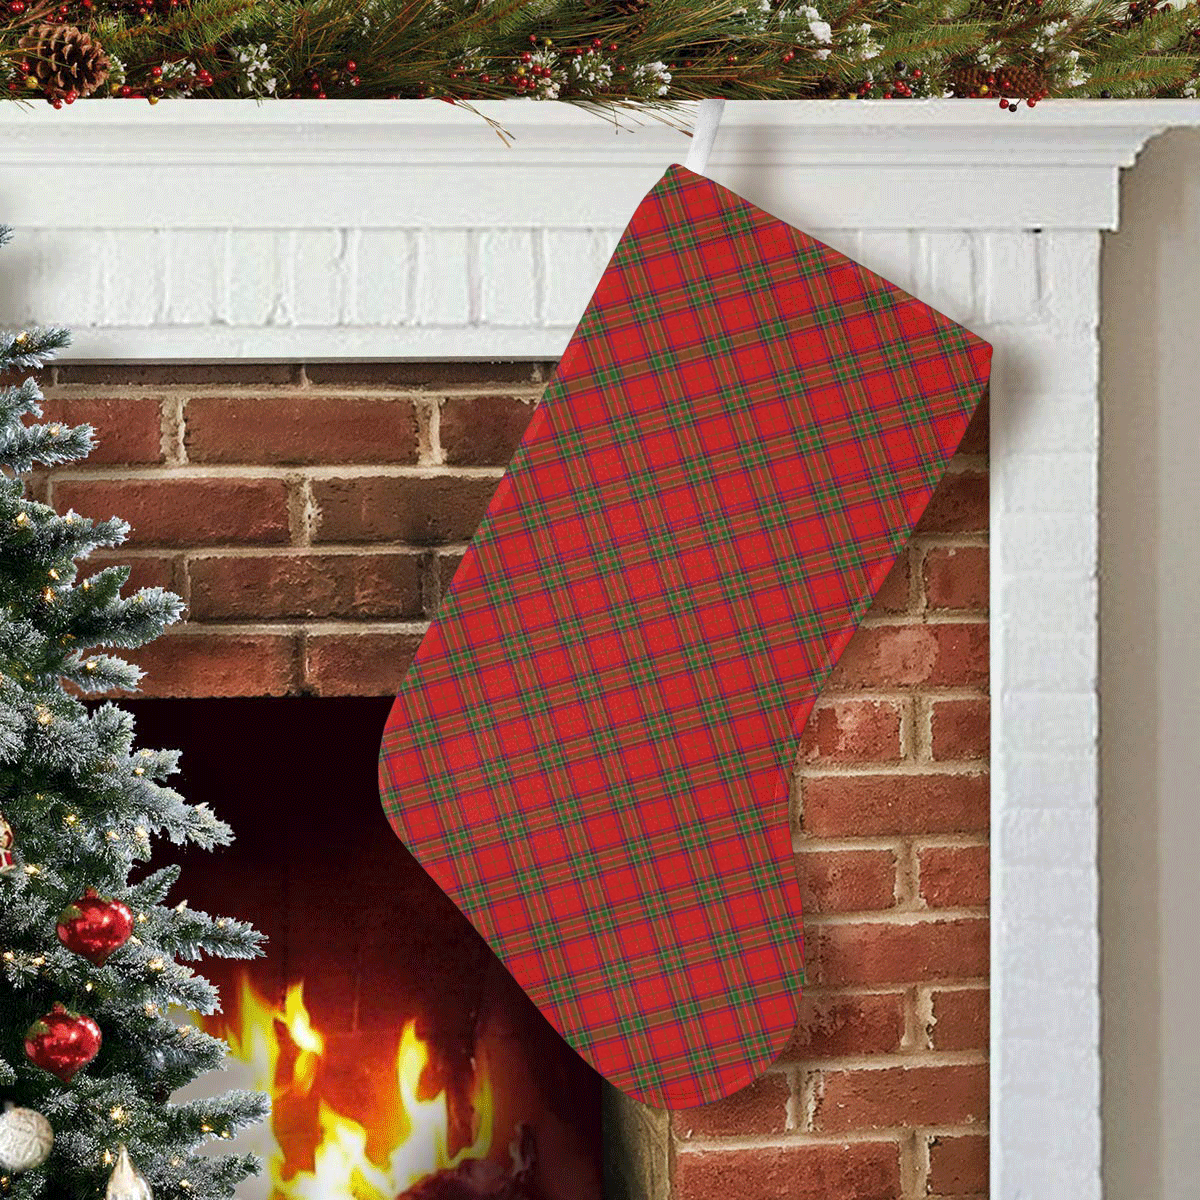 Christmas Red Tartan Plaid Pattern Christmas Stocking (Without Folded Top)